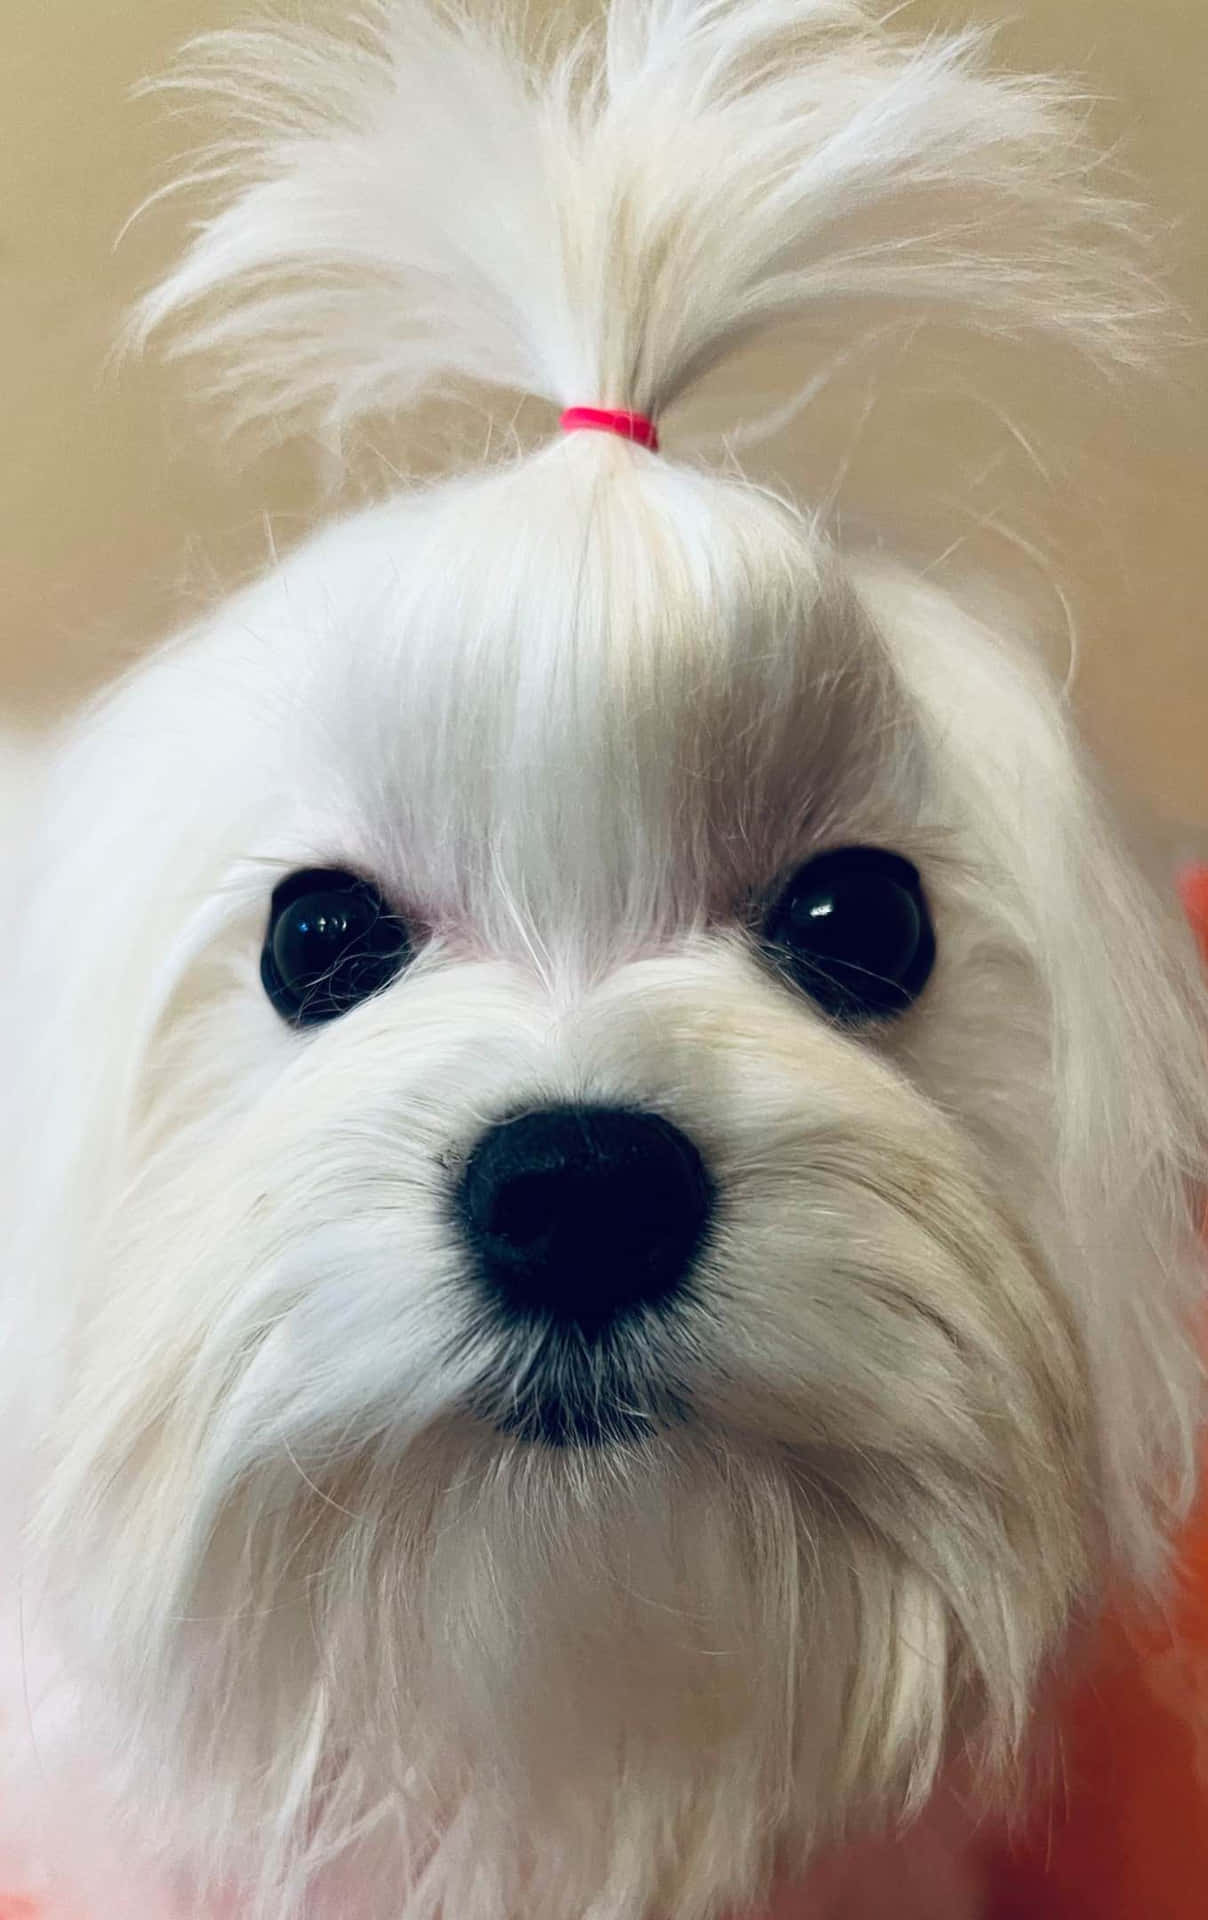 A White Dog With A Pink Bow On Its Head